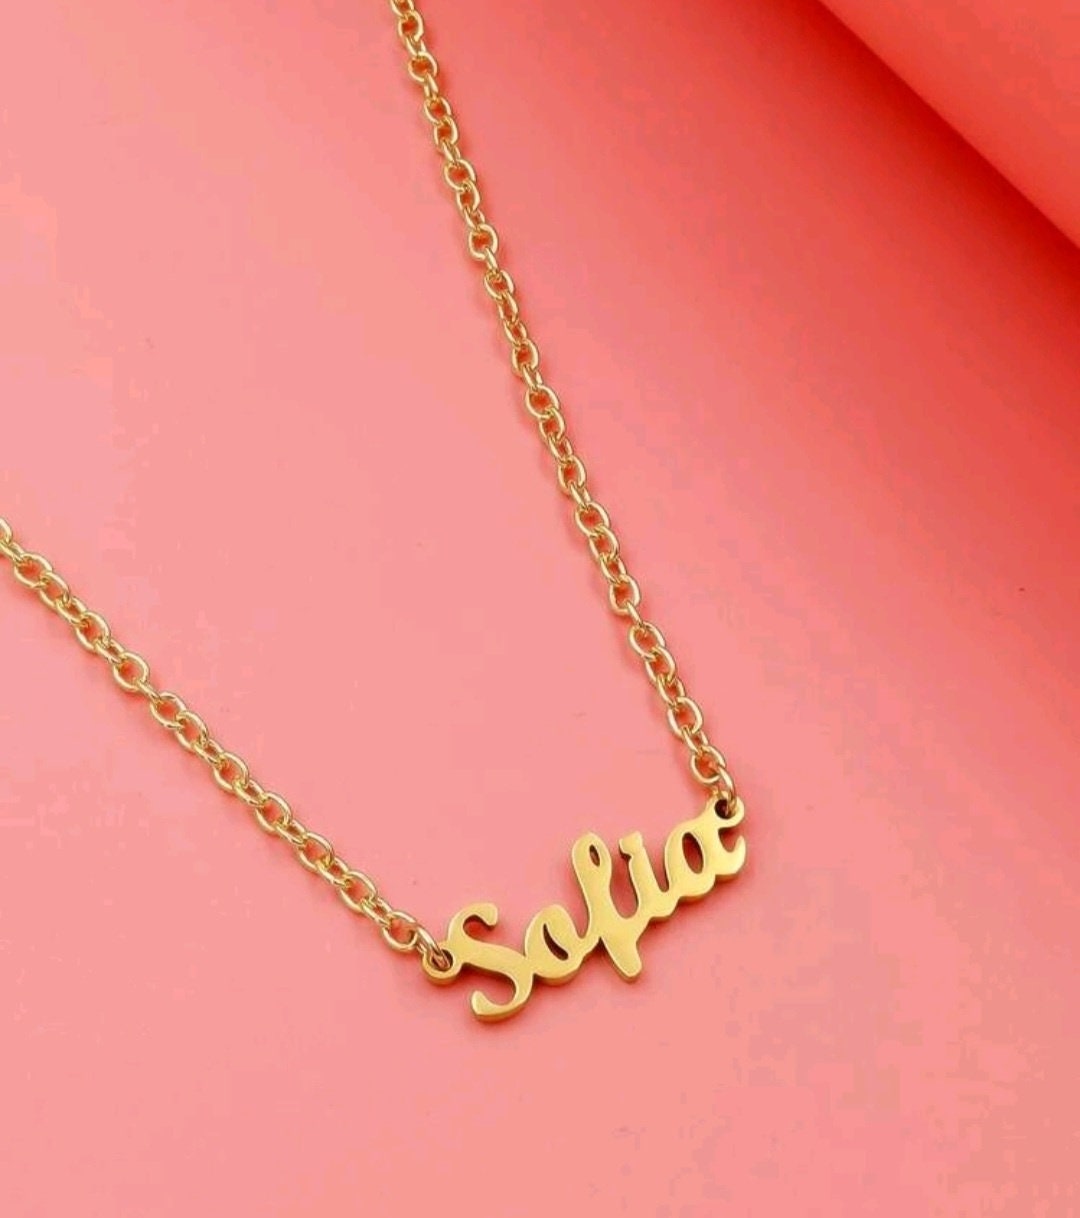 Dainty Name necklace Sofia gold Stainless steel pendant necklace gift for her